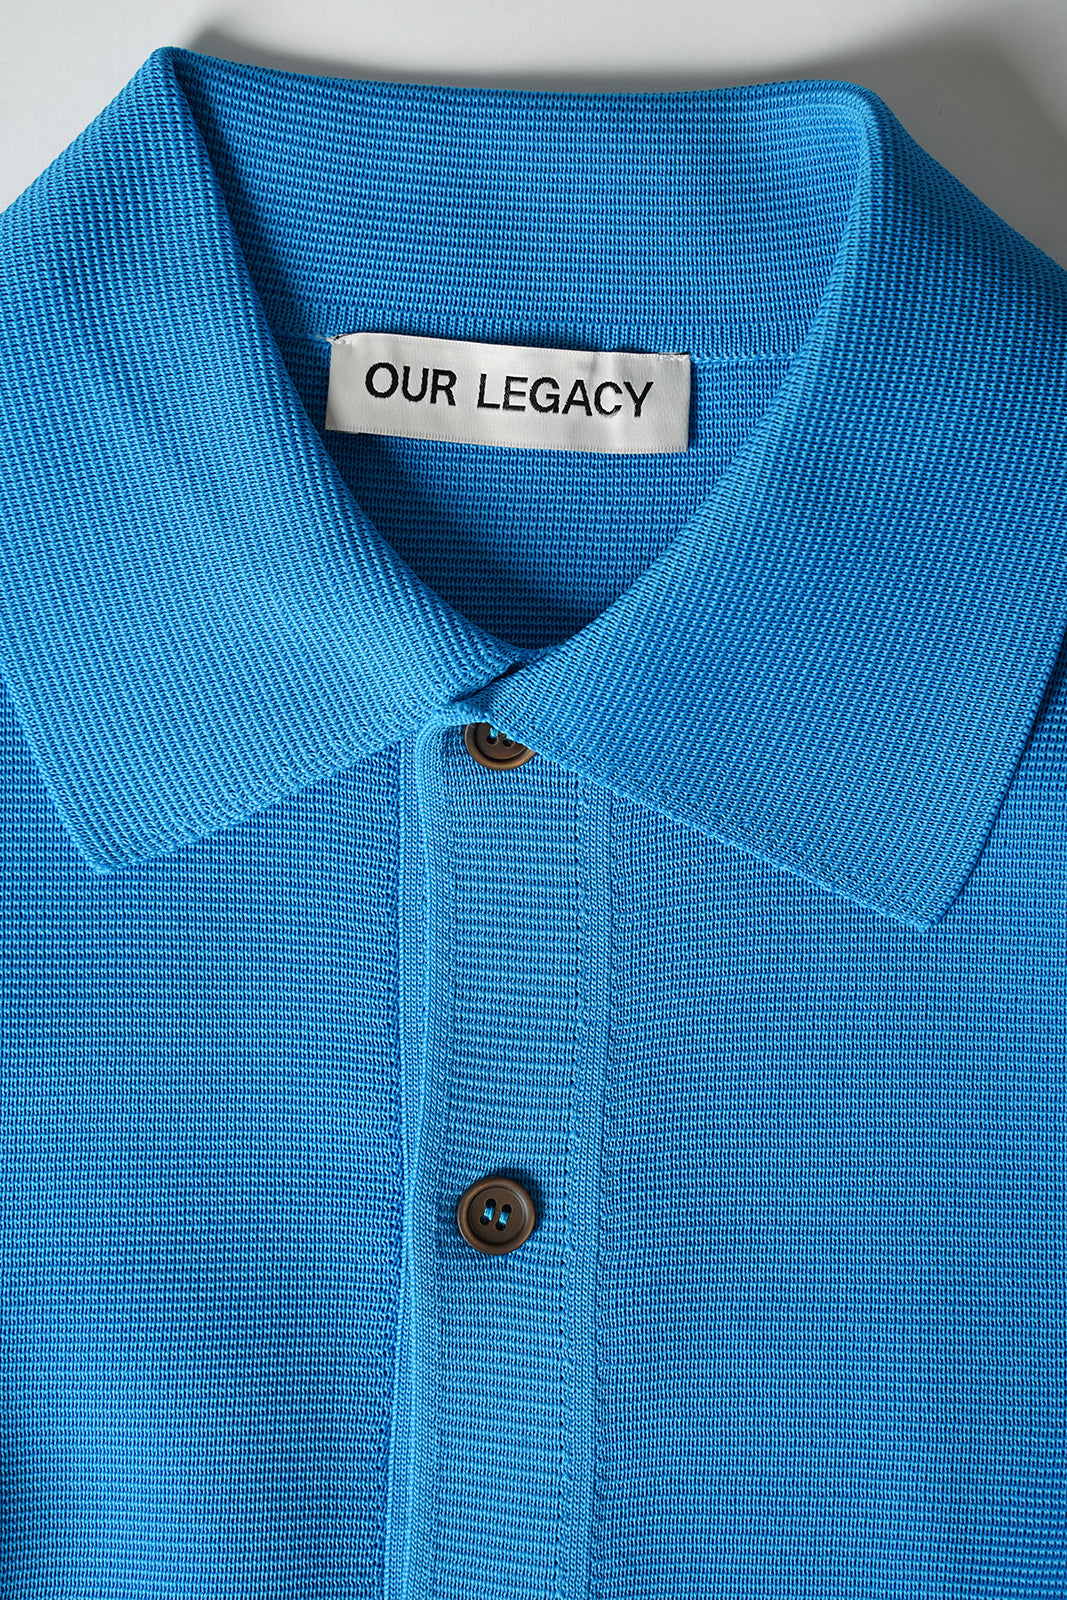 Our Legacy - EVENING POLO PERFORMANCE CIRCUIT BLUE – LE LABO STORE